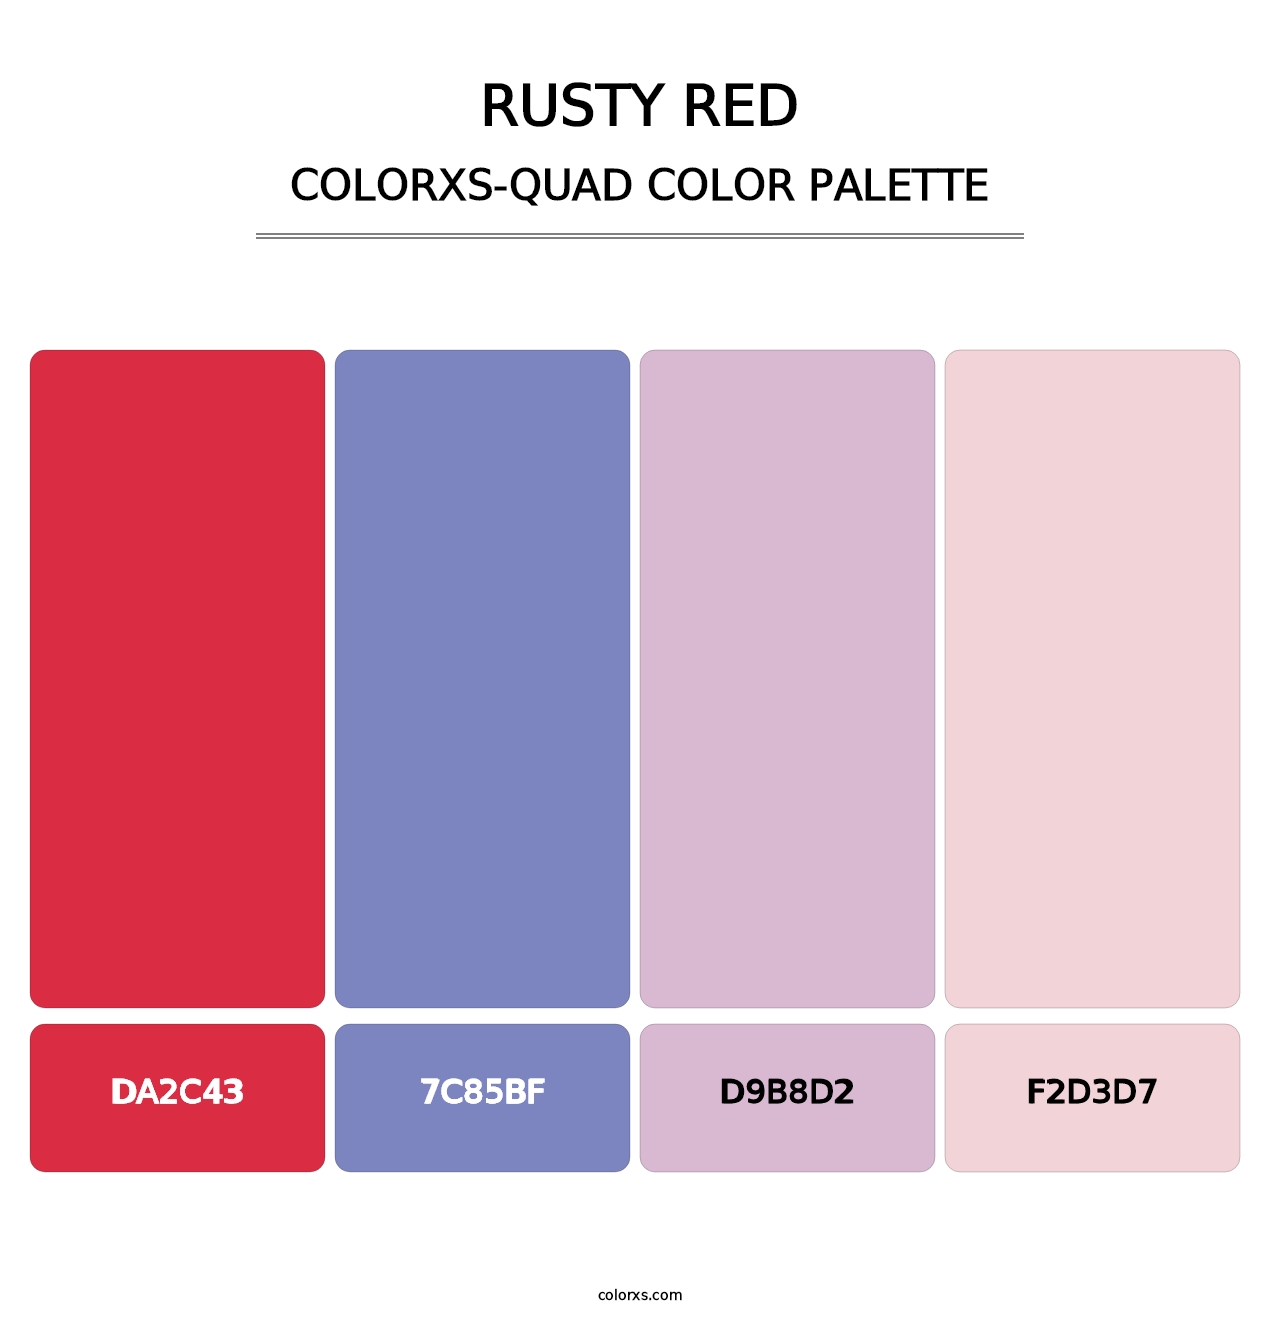 Rusty Red - Colorxs Quad Palette